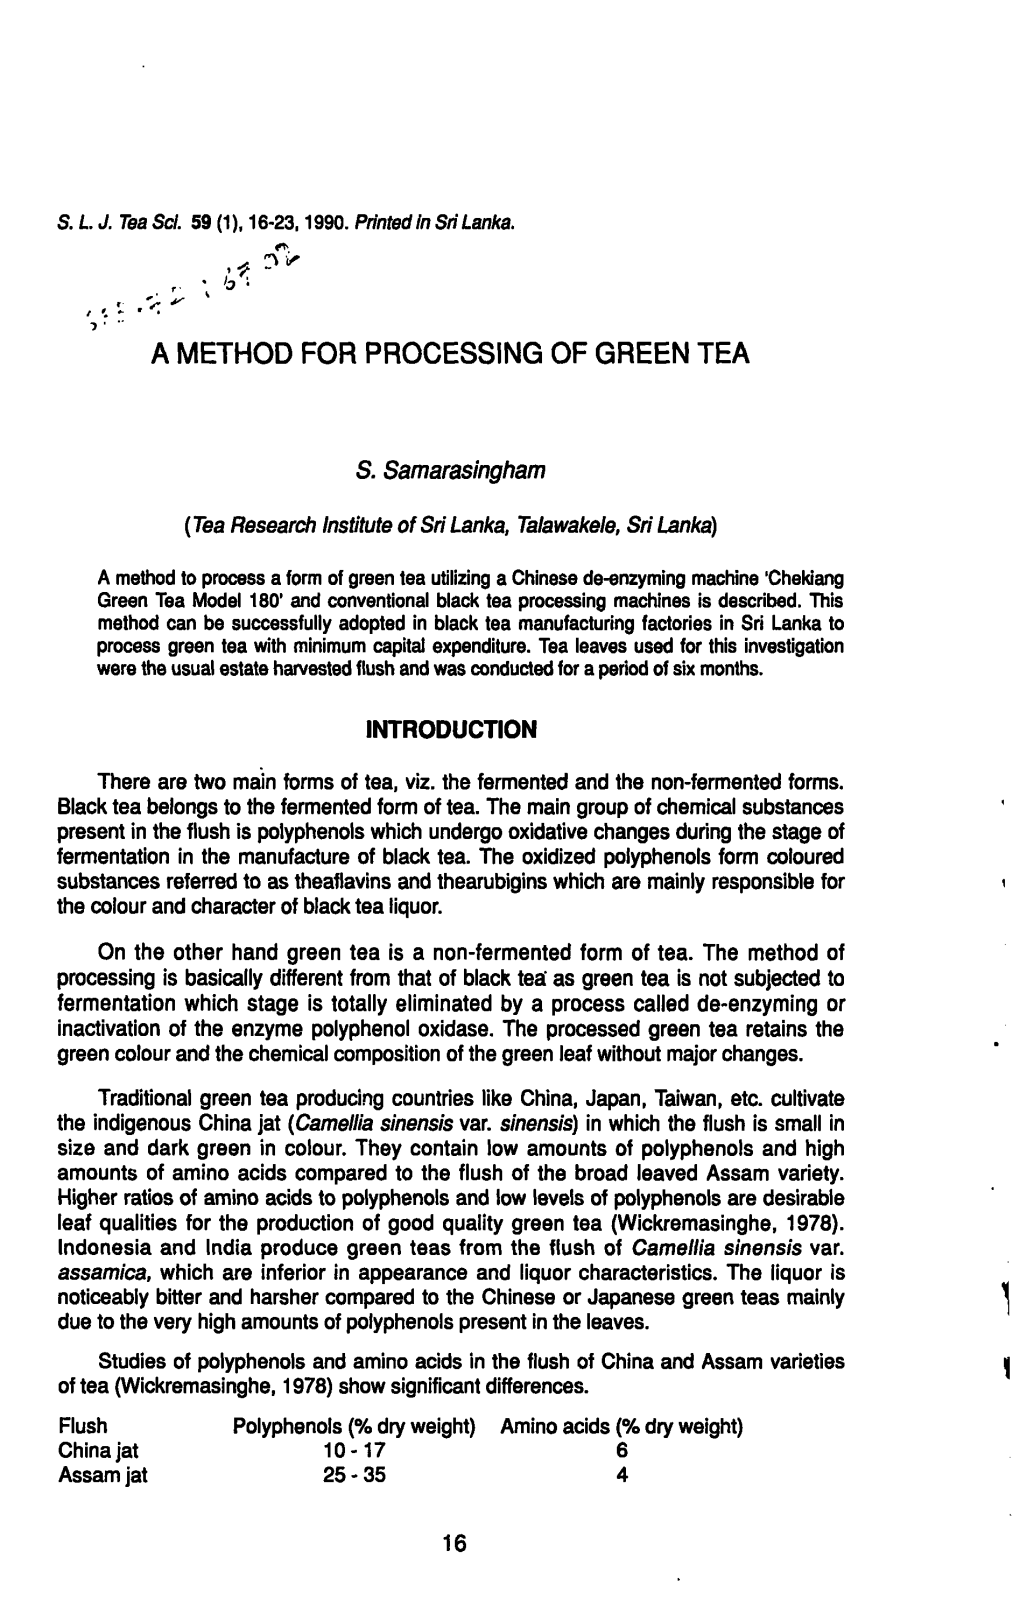 A Method for Processing of Green Tea